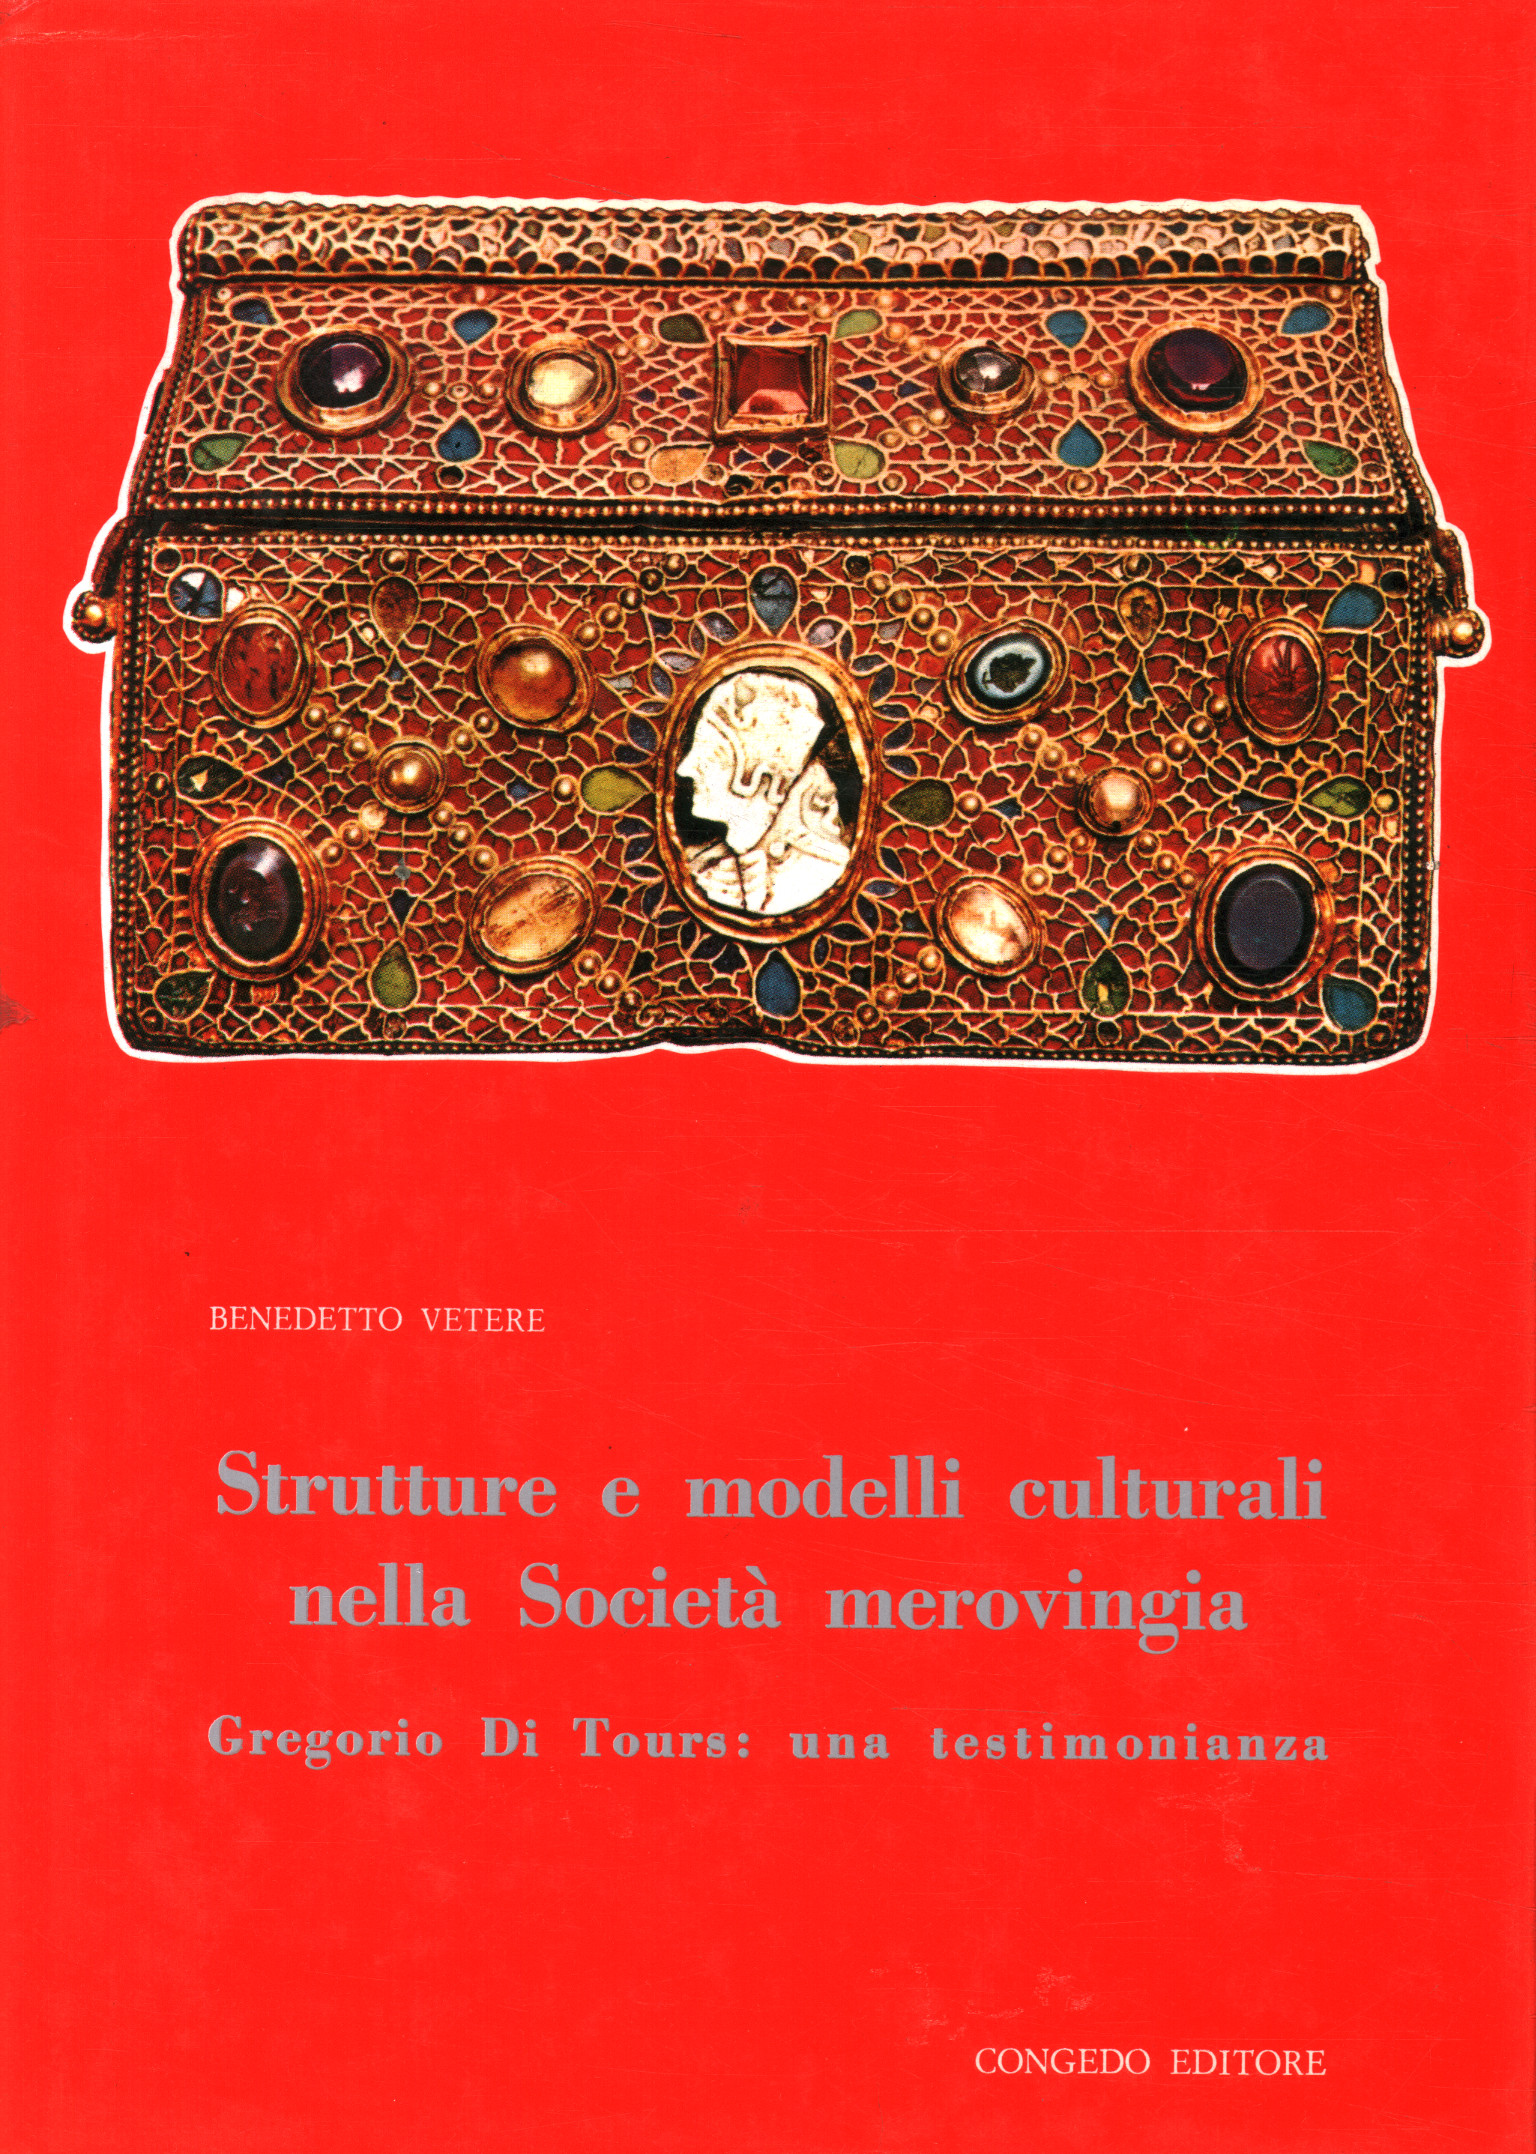 Cultural structures and models in soci